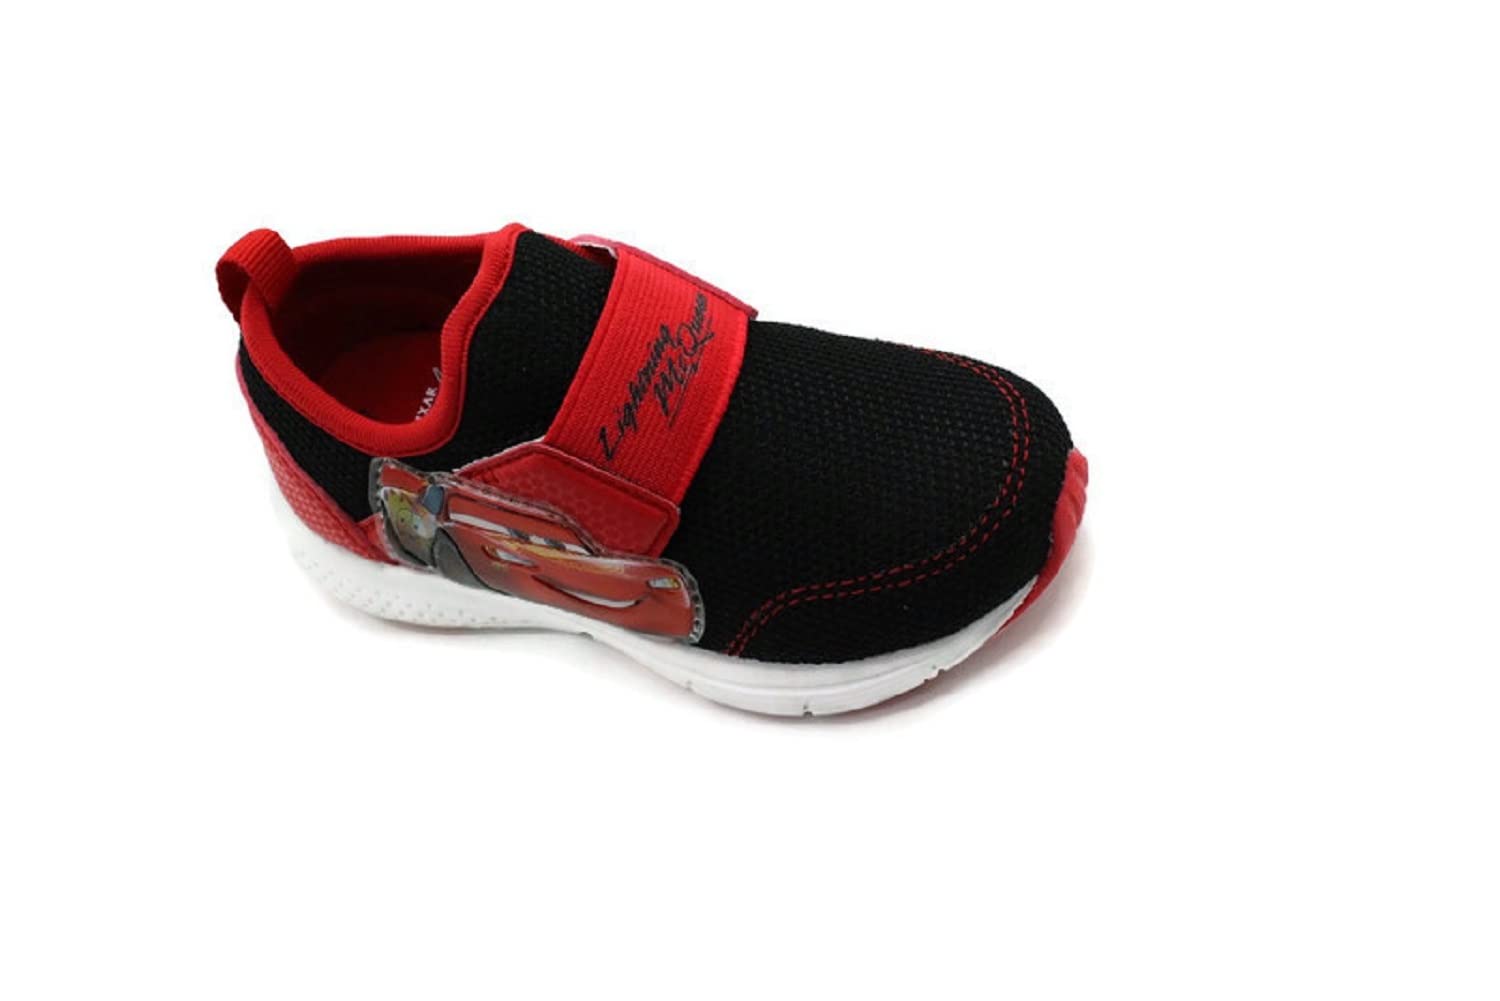  Disney Cars Boy's Lighted Athletic Sneaker Lightning McQueen  Light Up Shoes Children W/Adjustable Strap (Toddler), Black/Red, Size 7 :  Clothing, Shoes & Jewelry